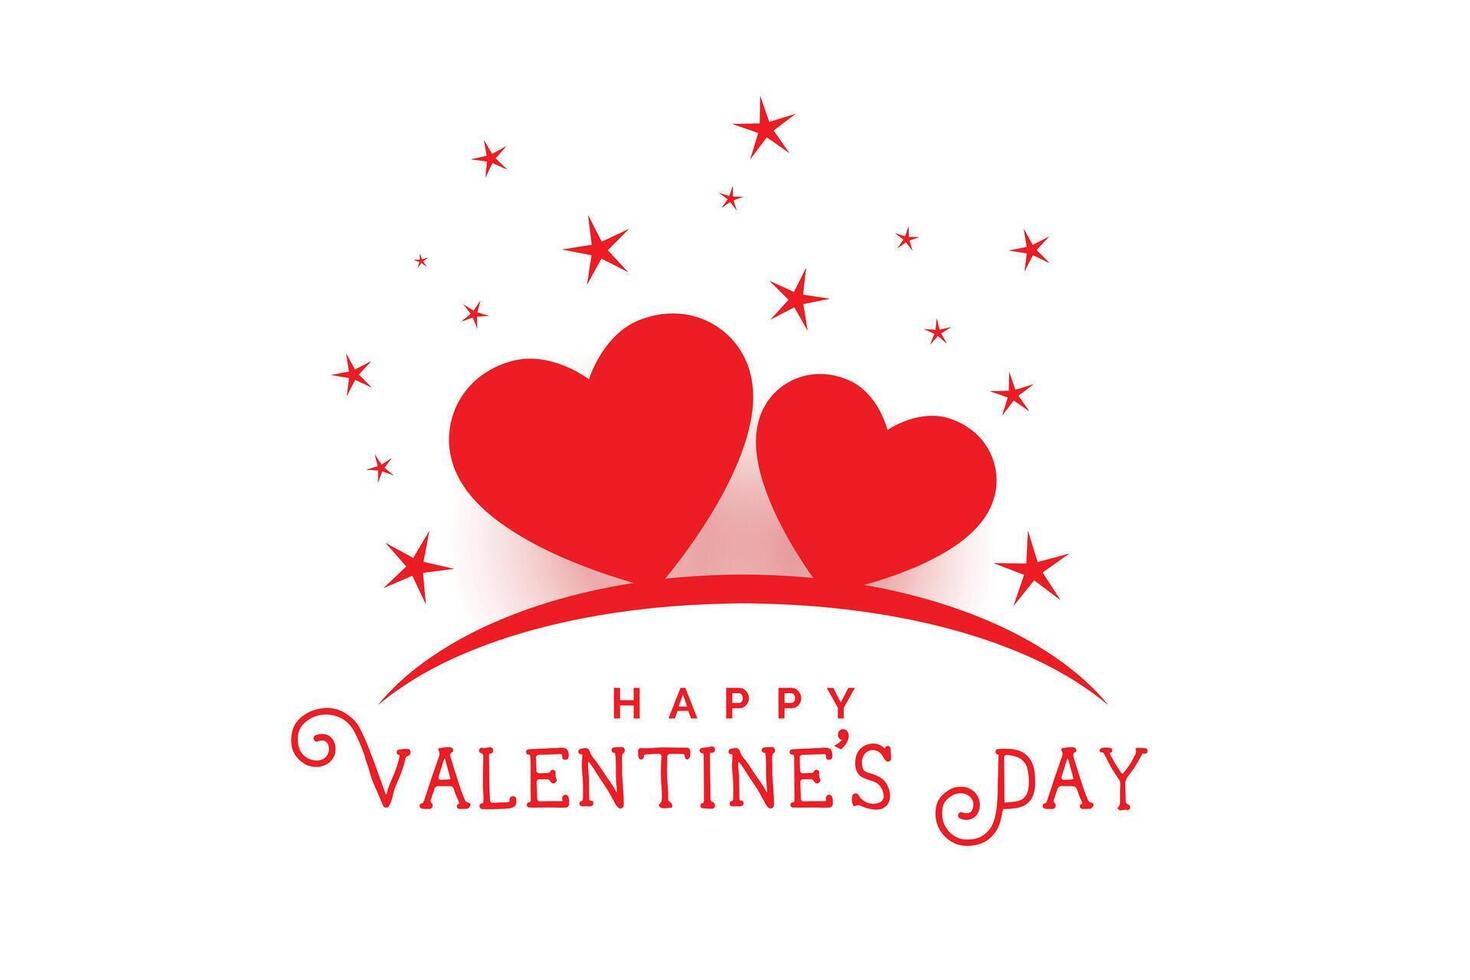 happy valentines day beautiful hearts and stars background vector